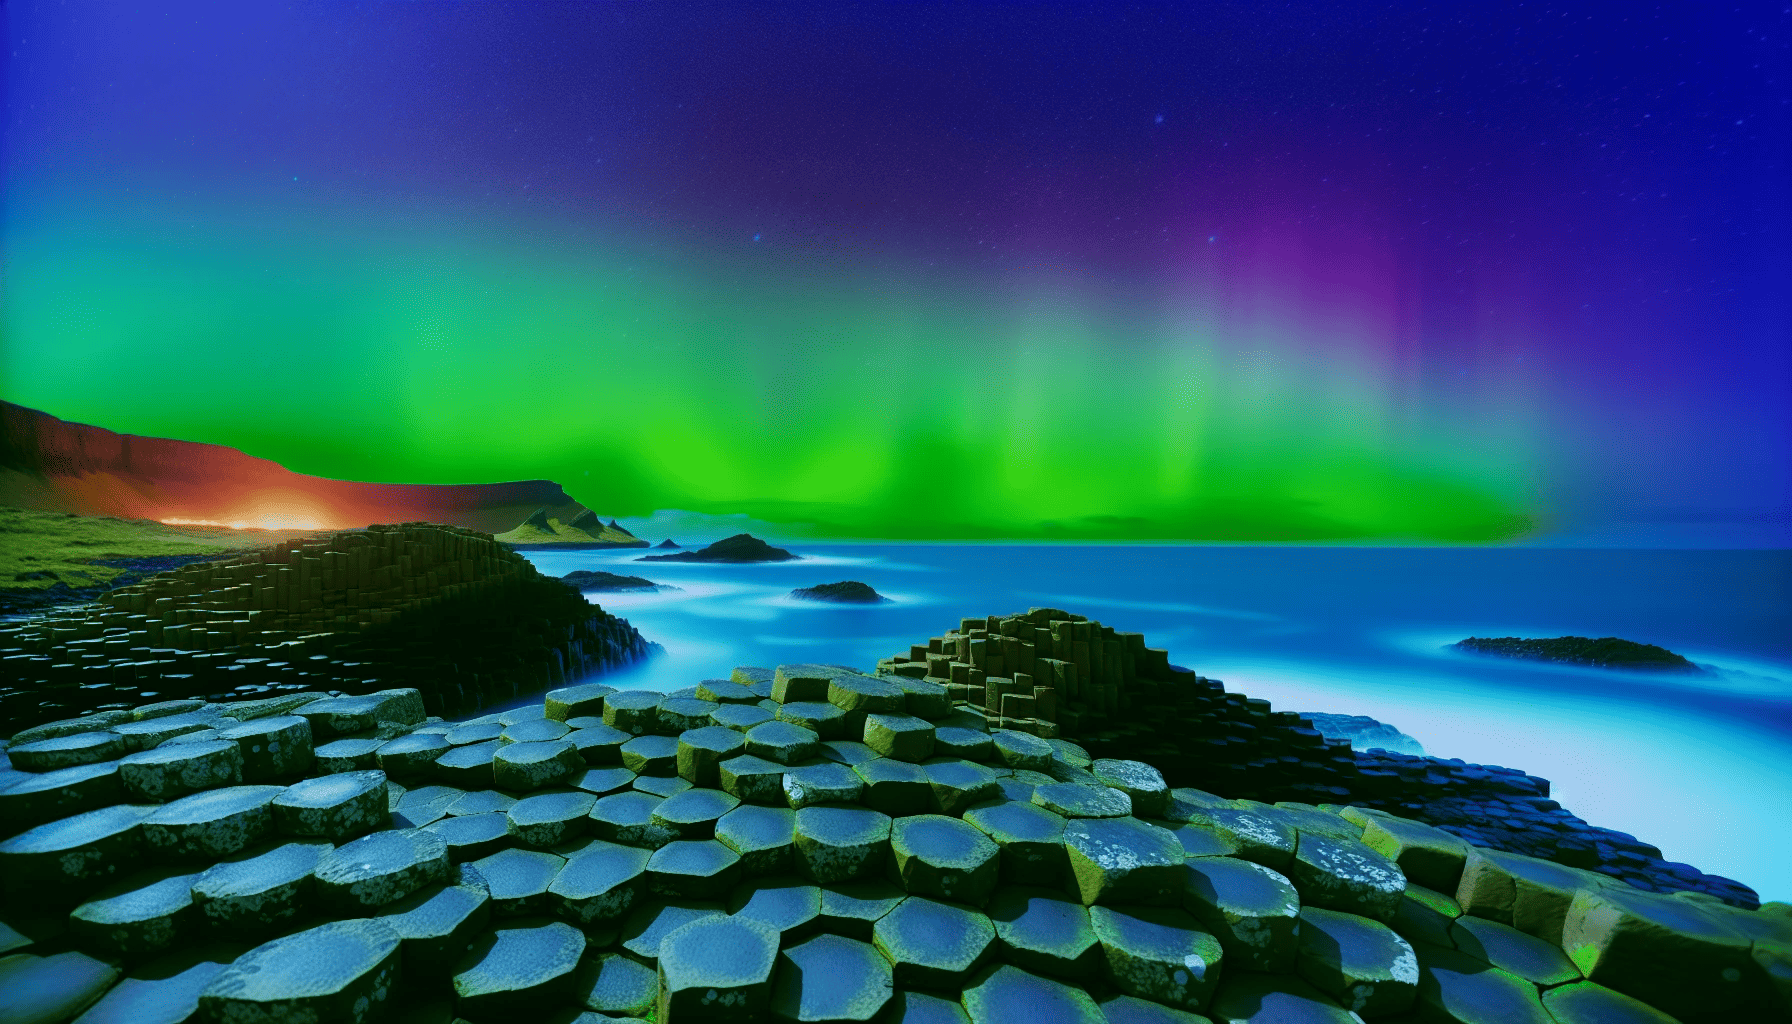 Giant's Causeway, a prime location for viewing the Northern Lights in Northern Ireland